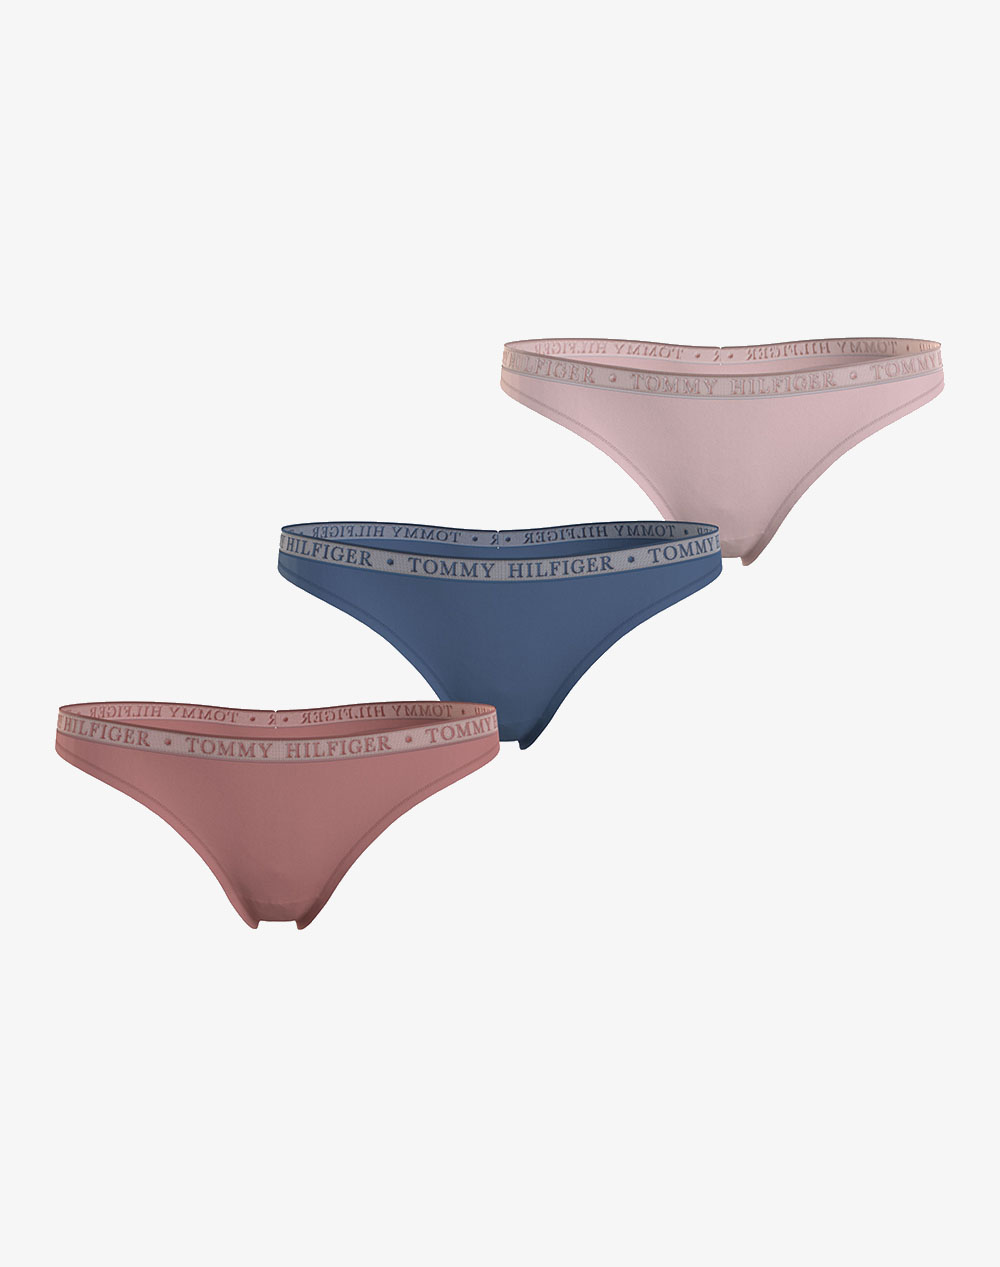 TOMMY HILFIGER LACE 3P THONG (EXT SIZES) UW0UW04890-0VV Multi 3810ATOMM1020015_XR30750